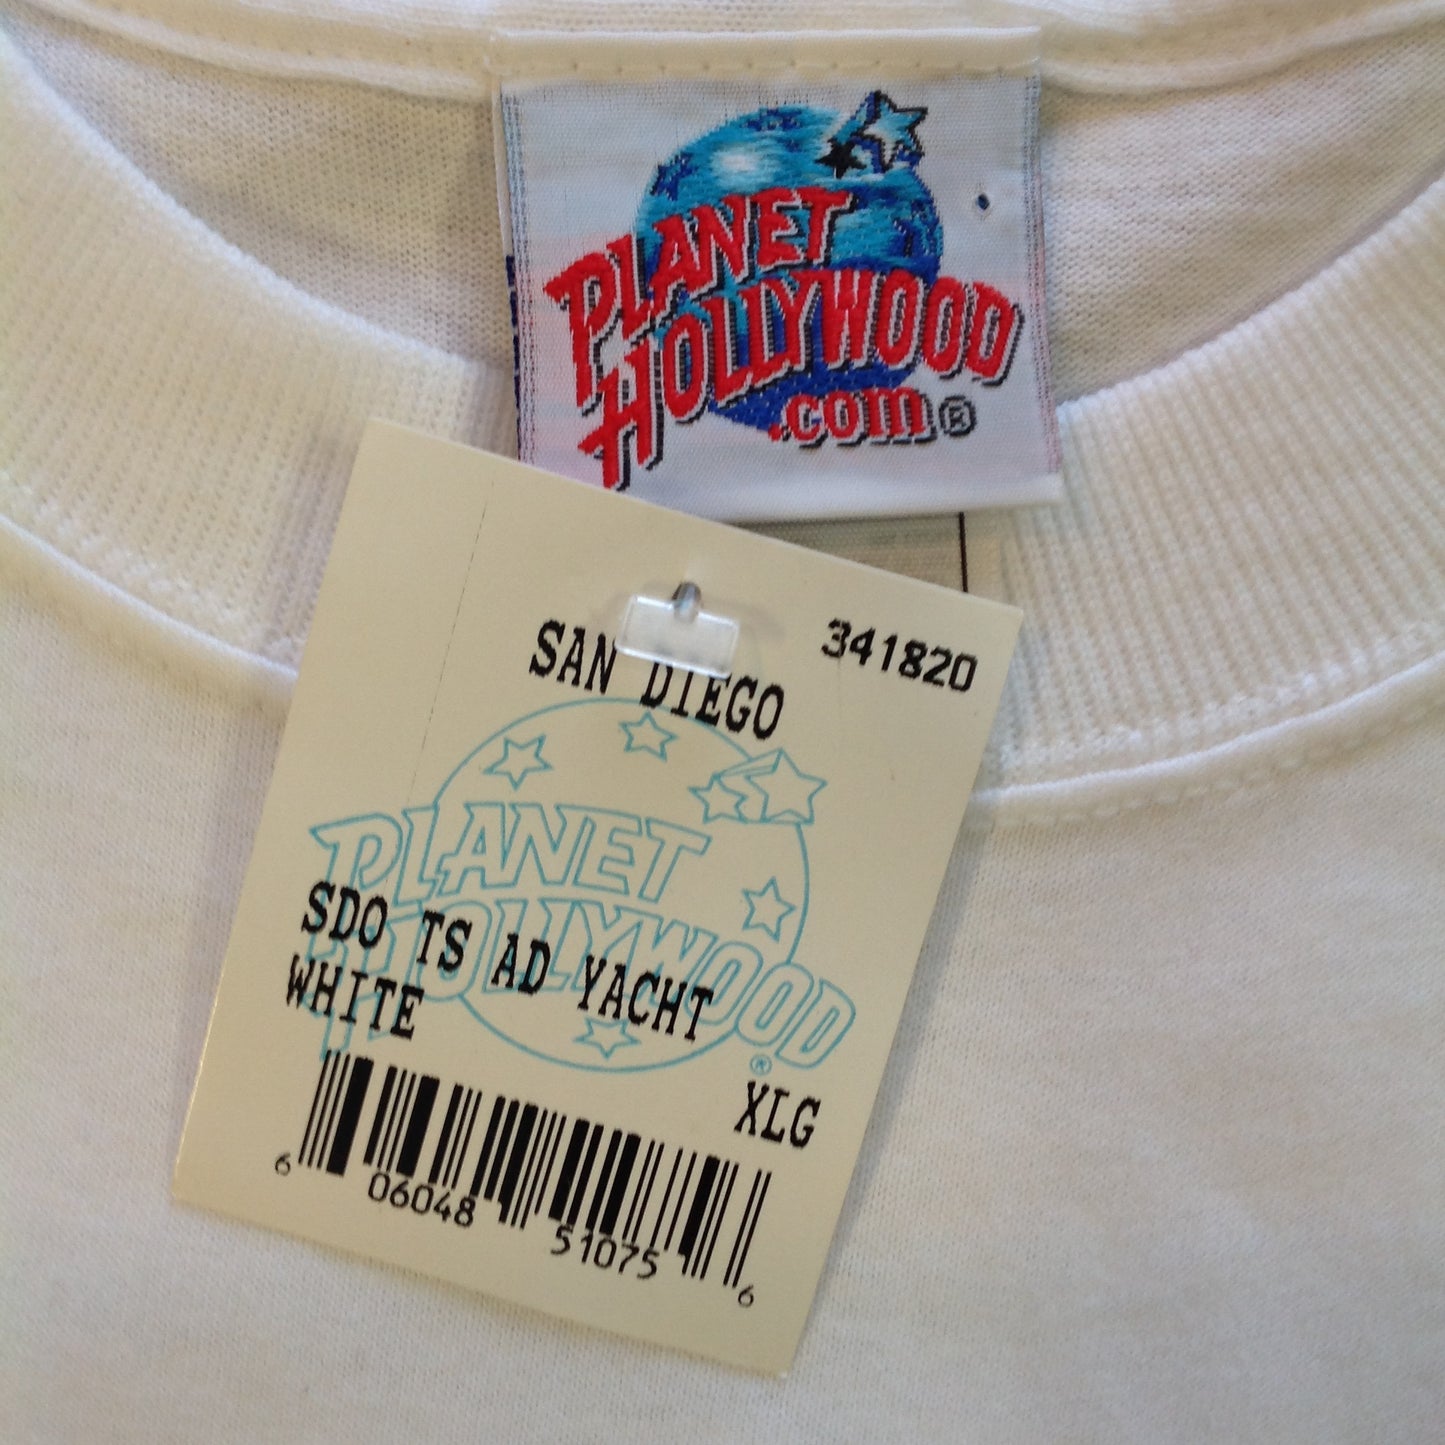 Authentic Souvenir Men's XL White Short Sleeve Planet Hollywood San Diego Color Sailing Yacht Unworn with Tags